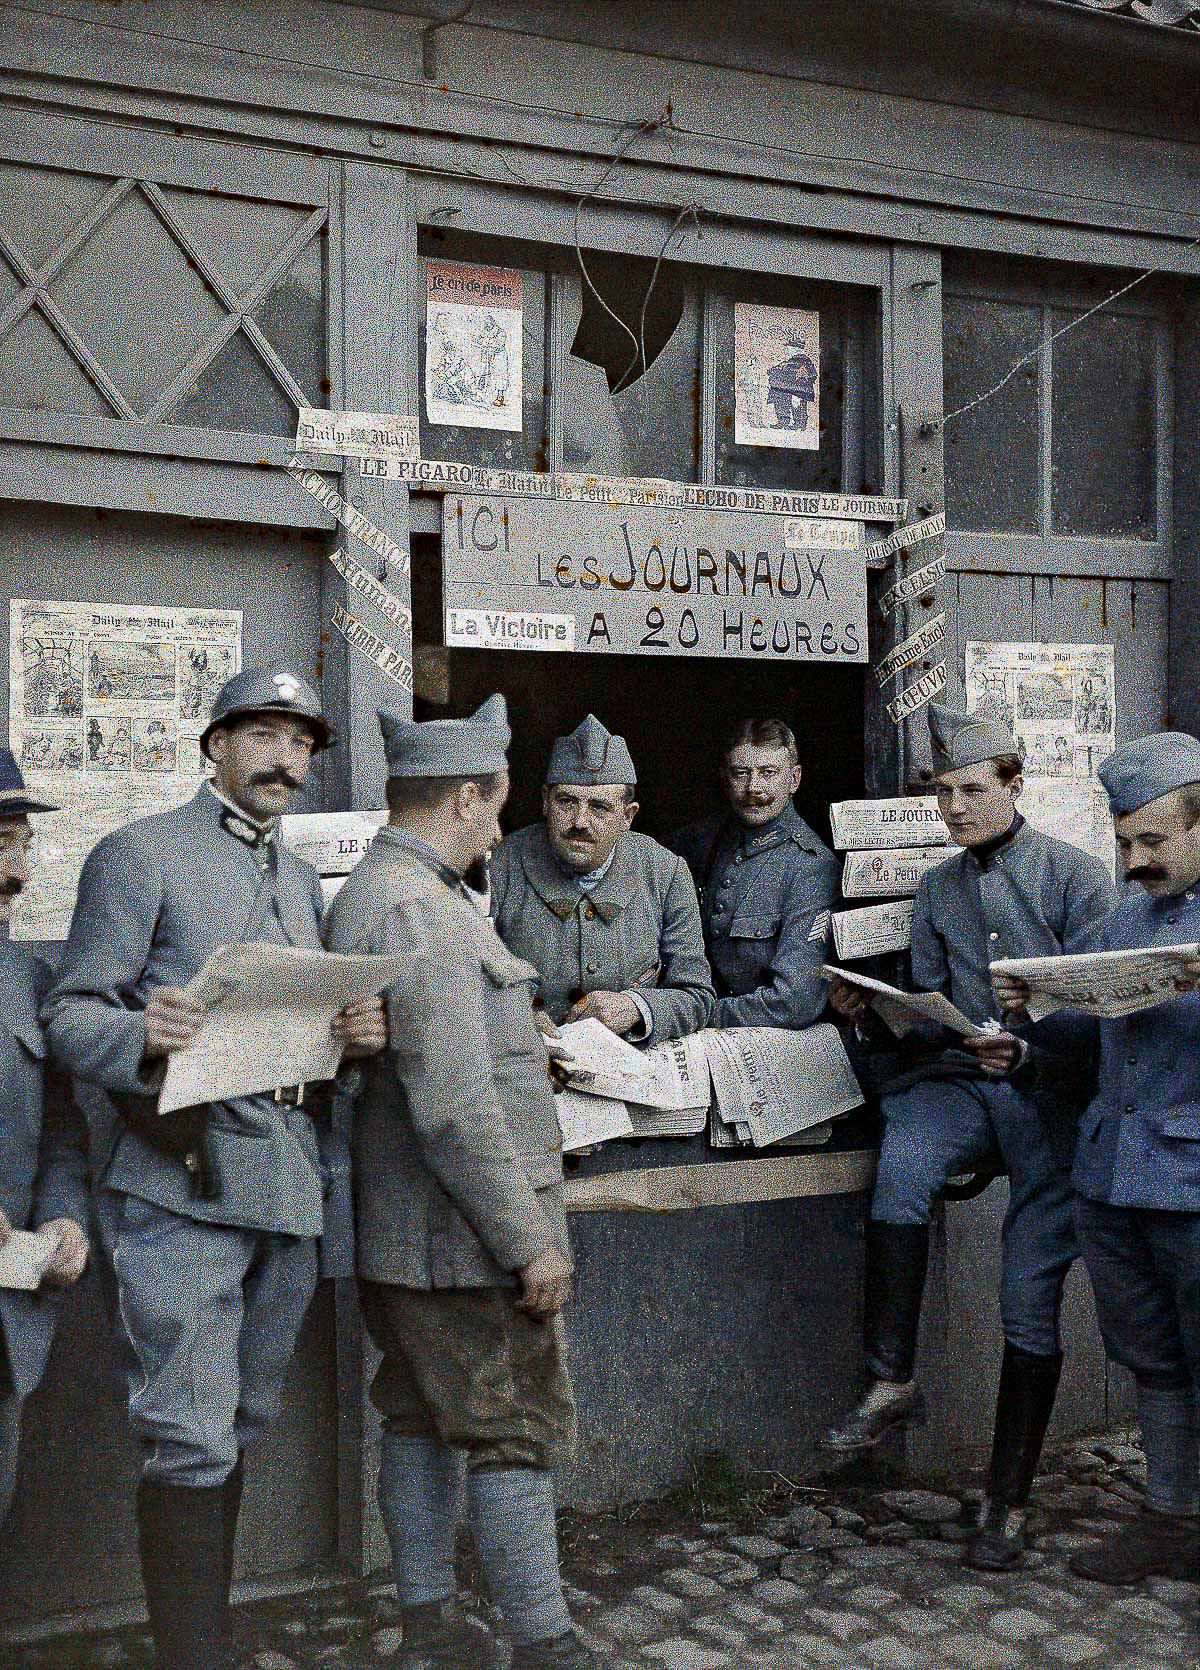 French soldiers read newspapers at a kiosk in Rexpoede, Calais, 1917